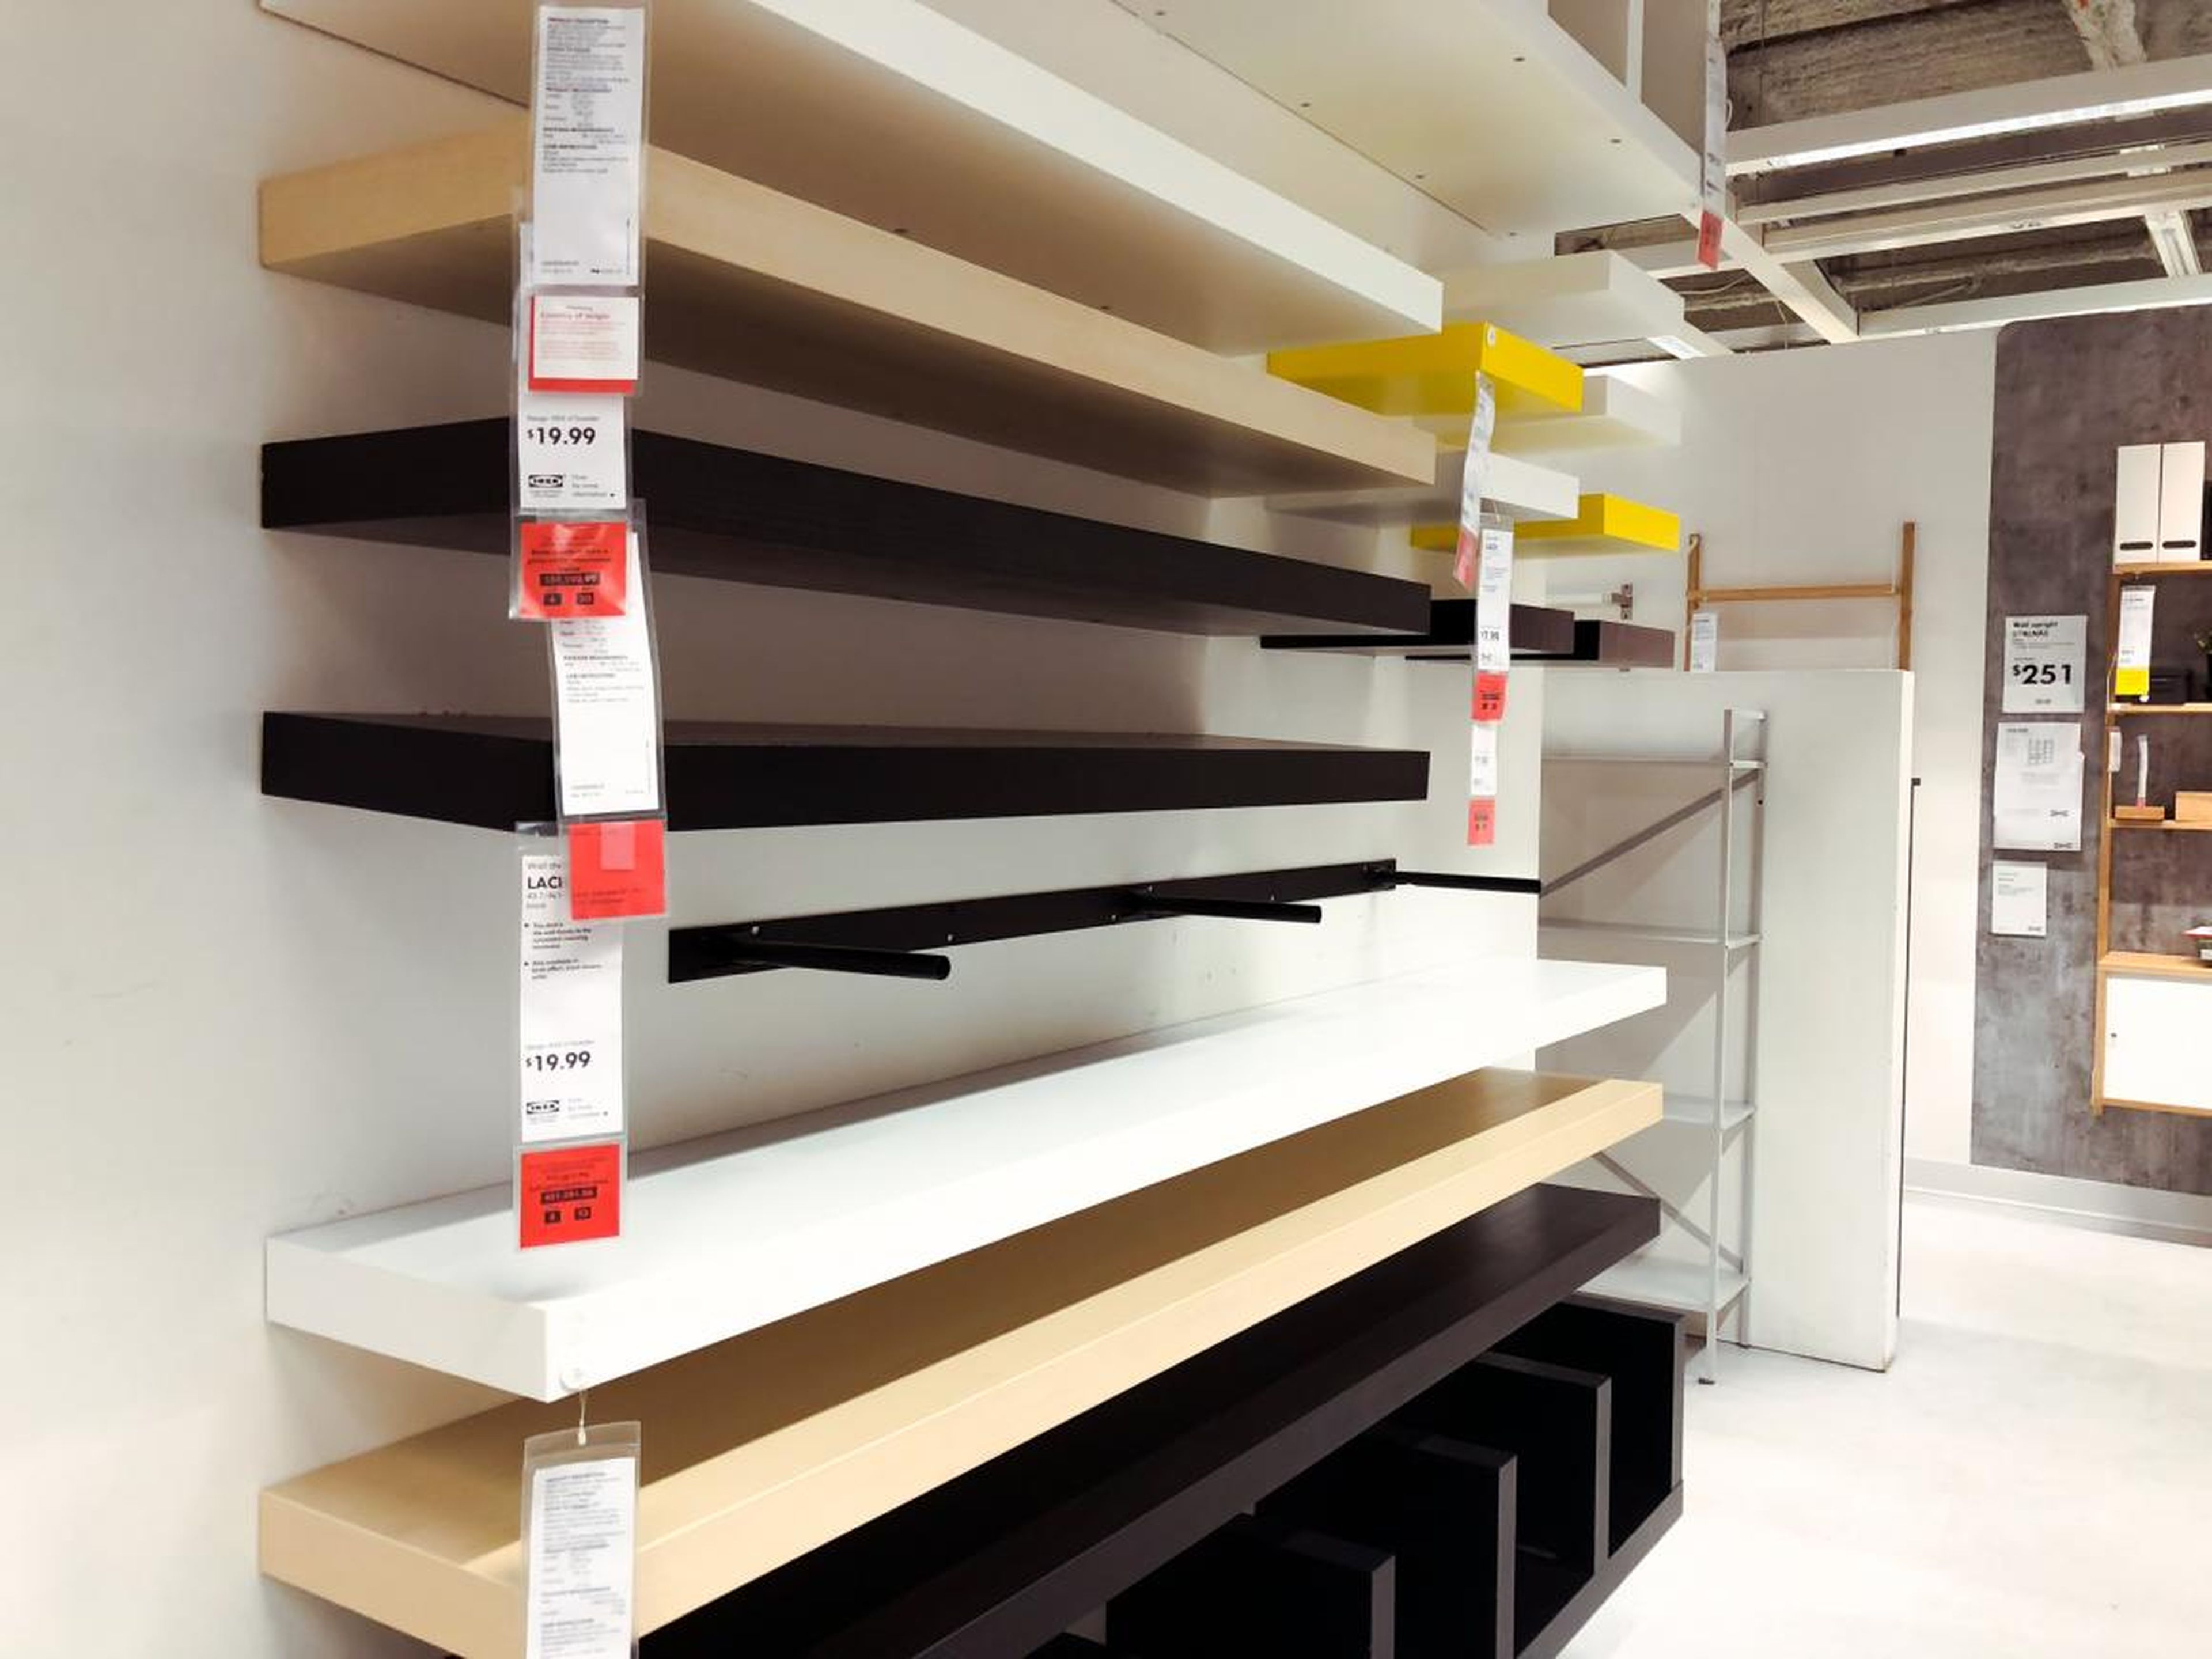 A lot of the products that IKEA carries are very minimalistic and simple. The quality didn't seem to be great, but nothing was particularly expensive. These shelves cost $20 each.